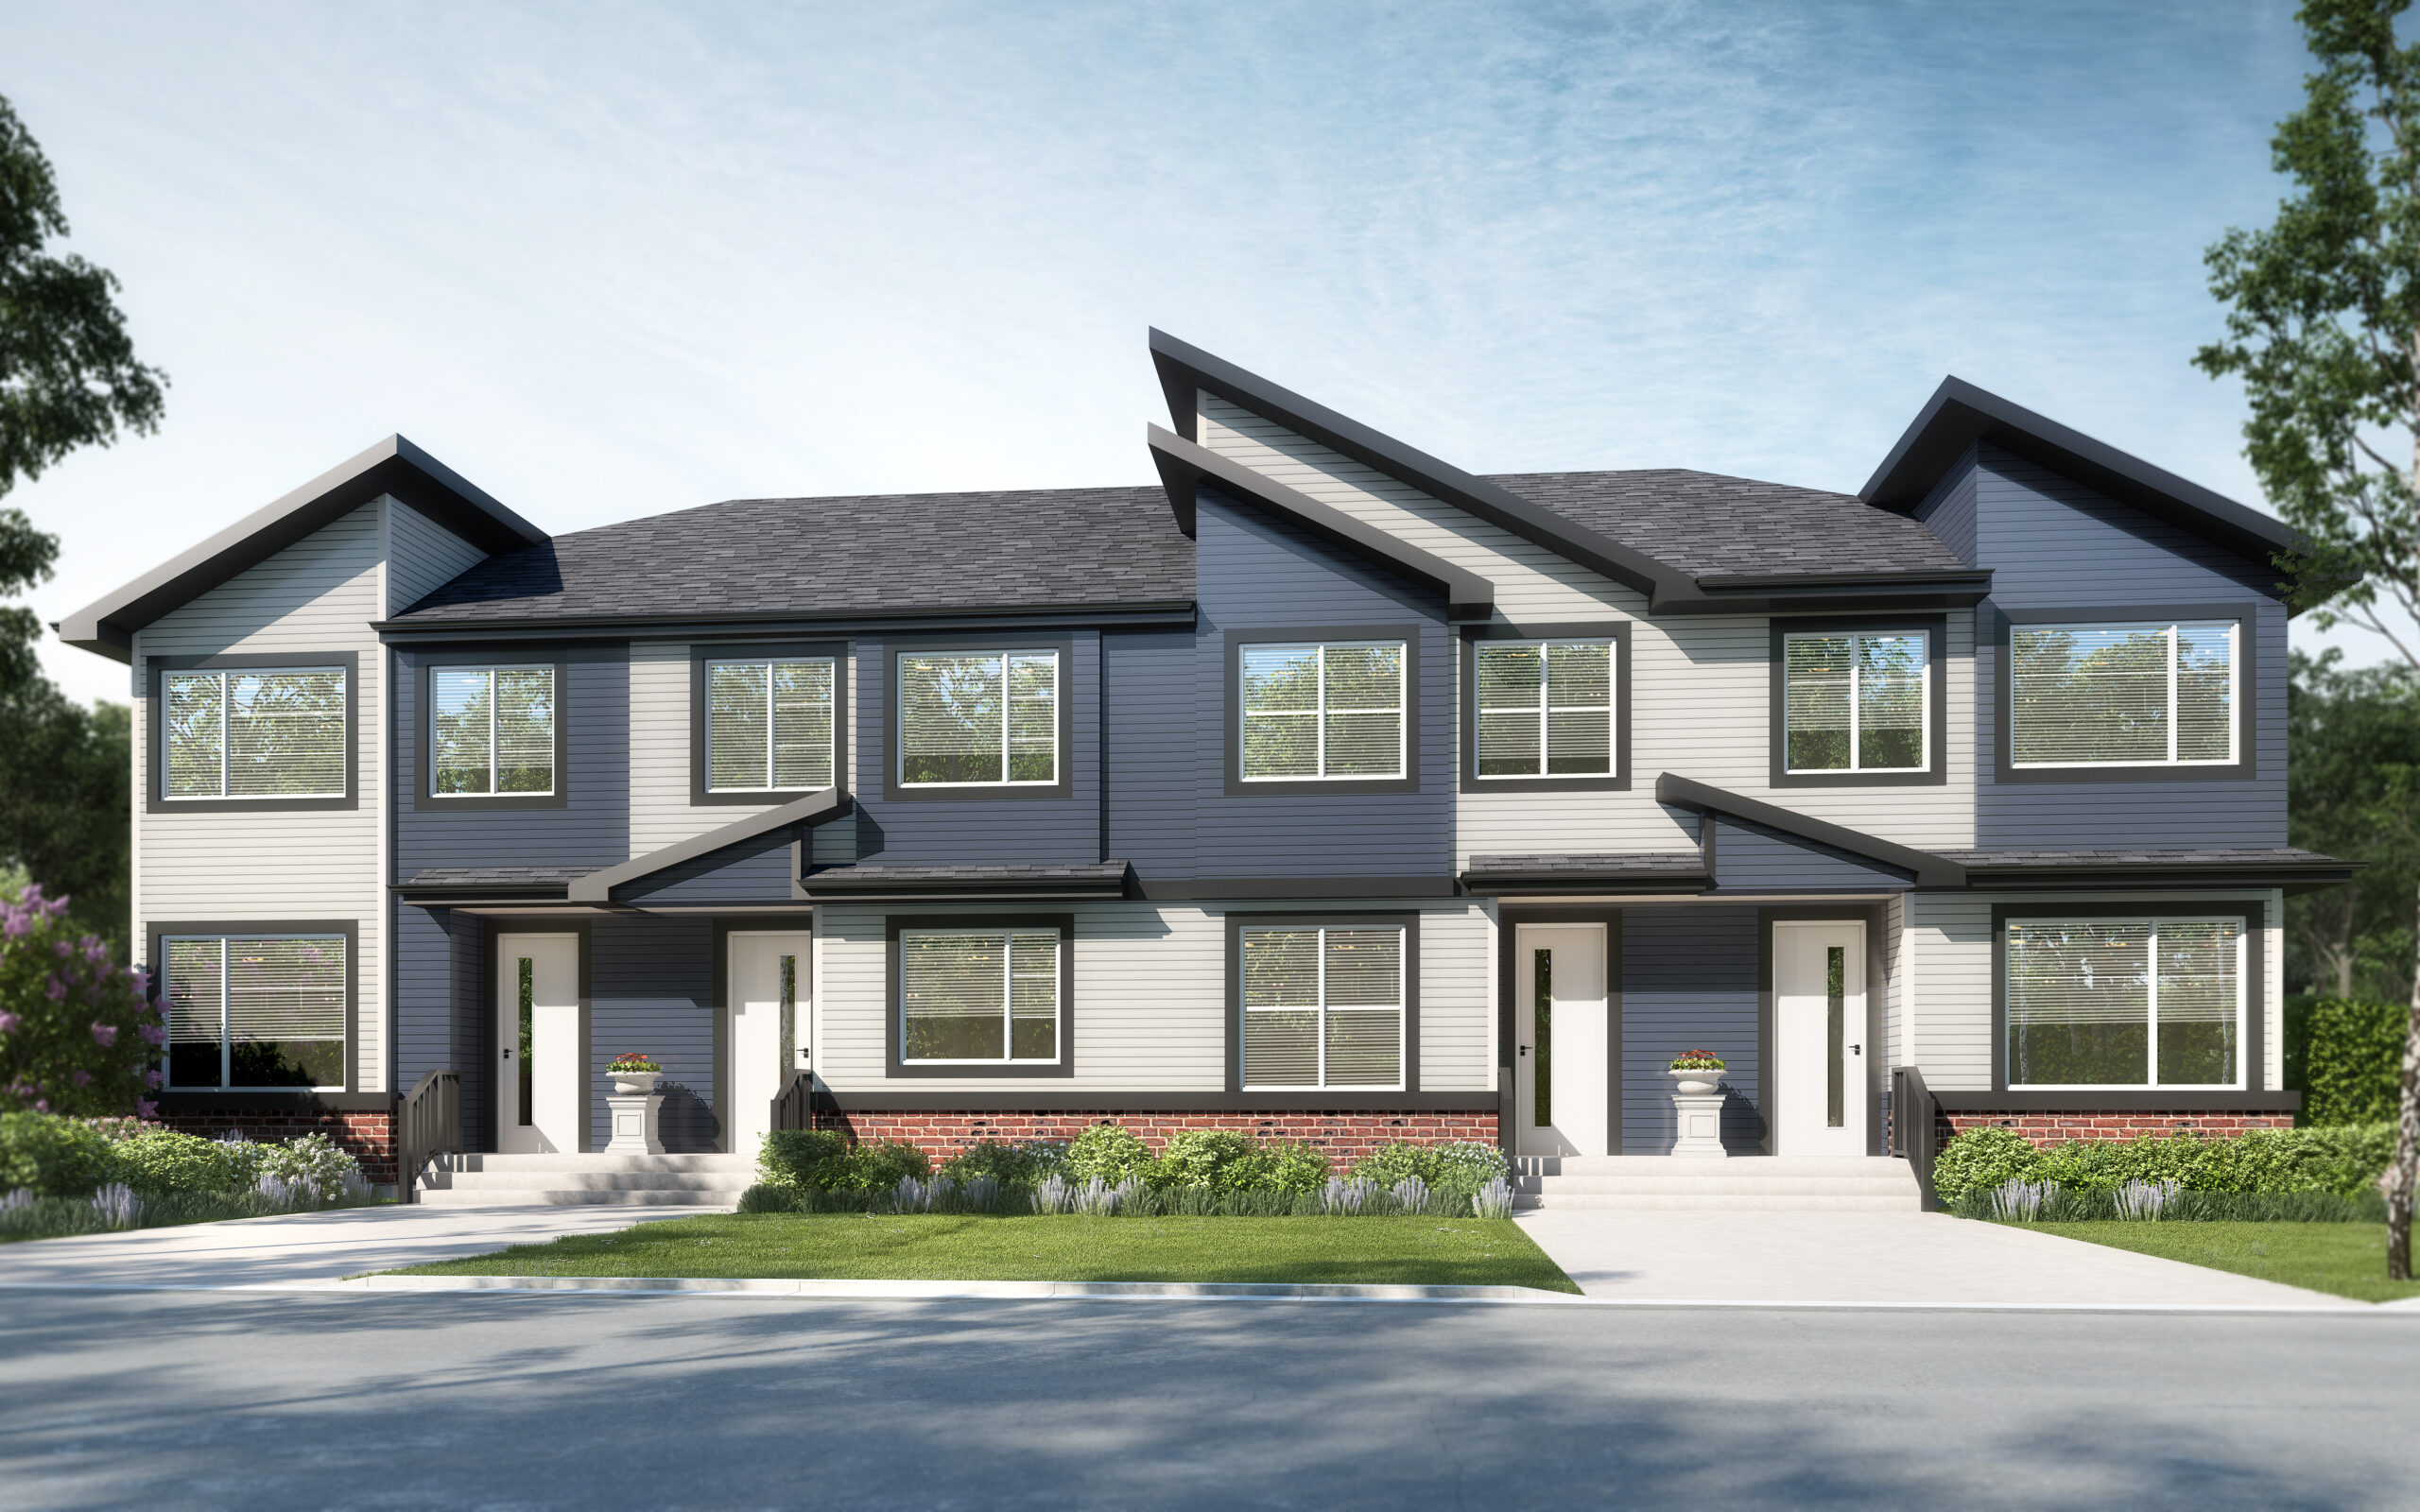 8 UNIT PROJECT IN EDMONTON (COMPLETE IN SEPTEMBER 2023)